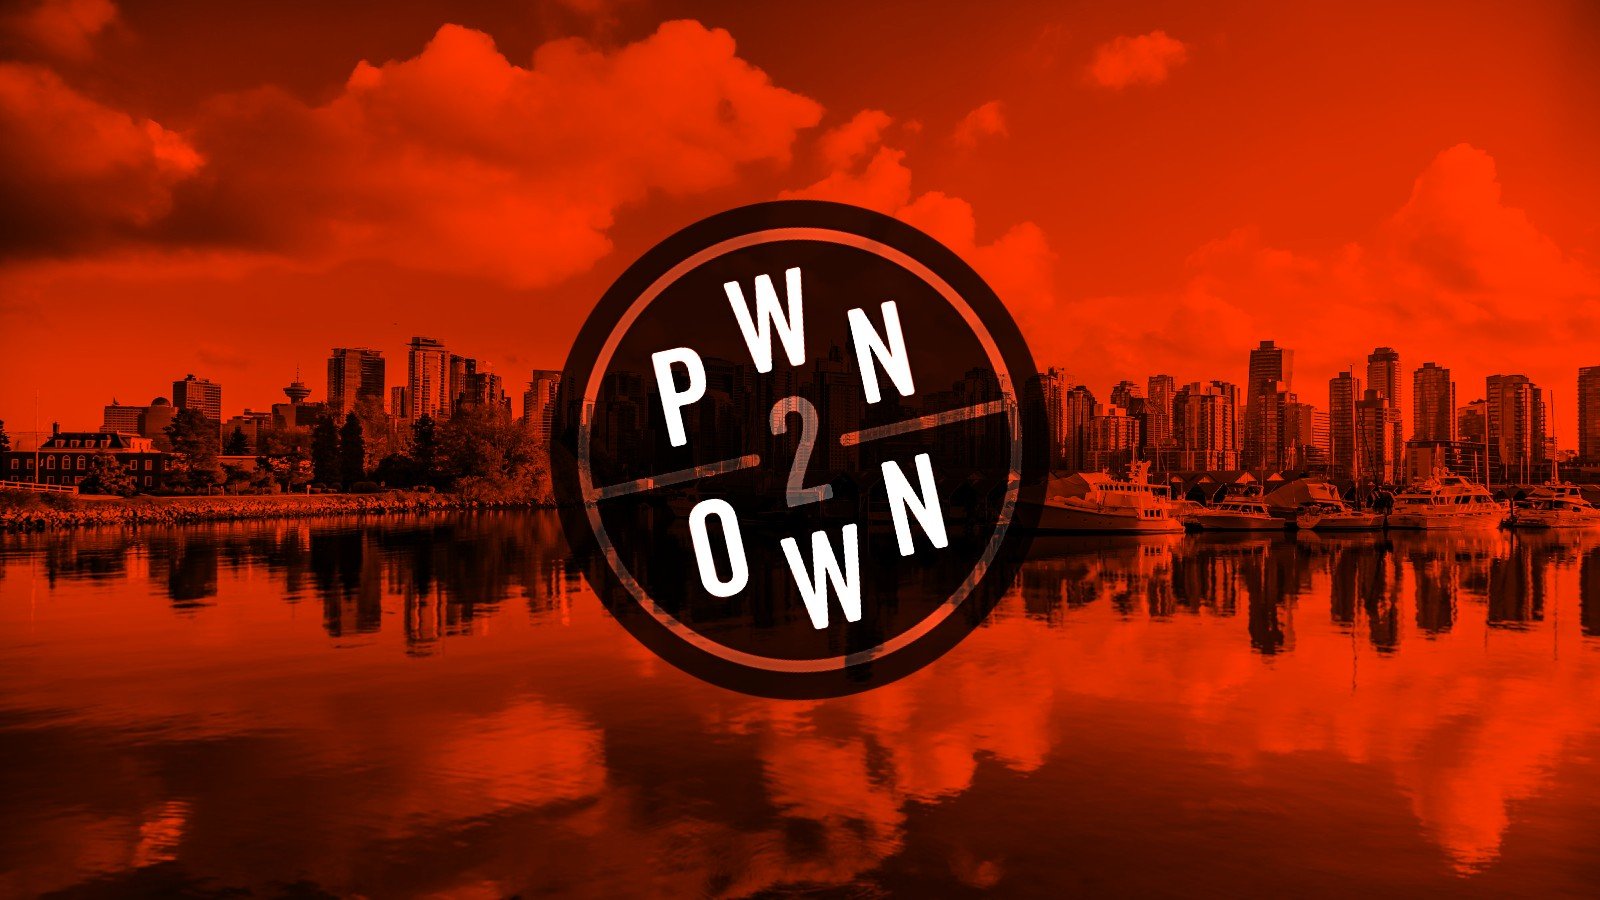 Hackers earn $1,132,500 for 29 zero-days at Pwn2Own Vancouver – Source: www.bleepingcomputer.com